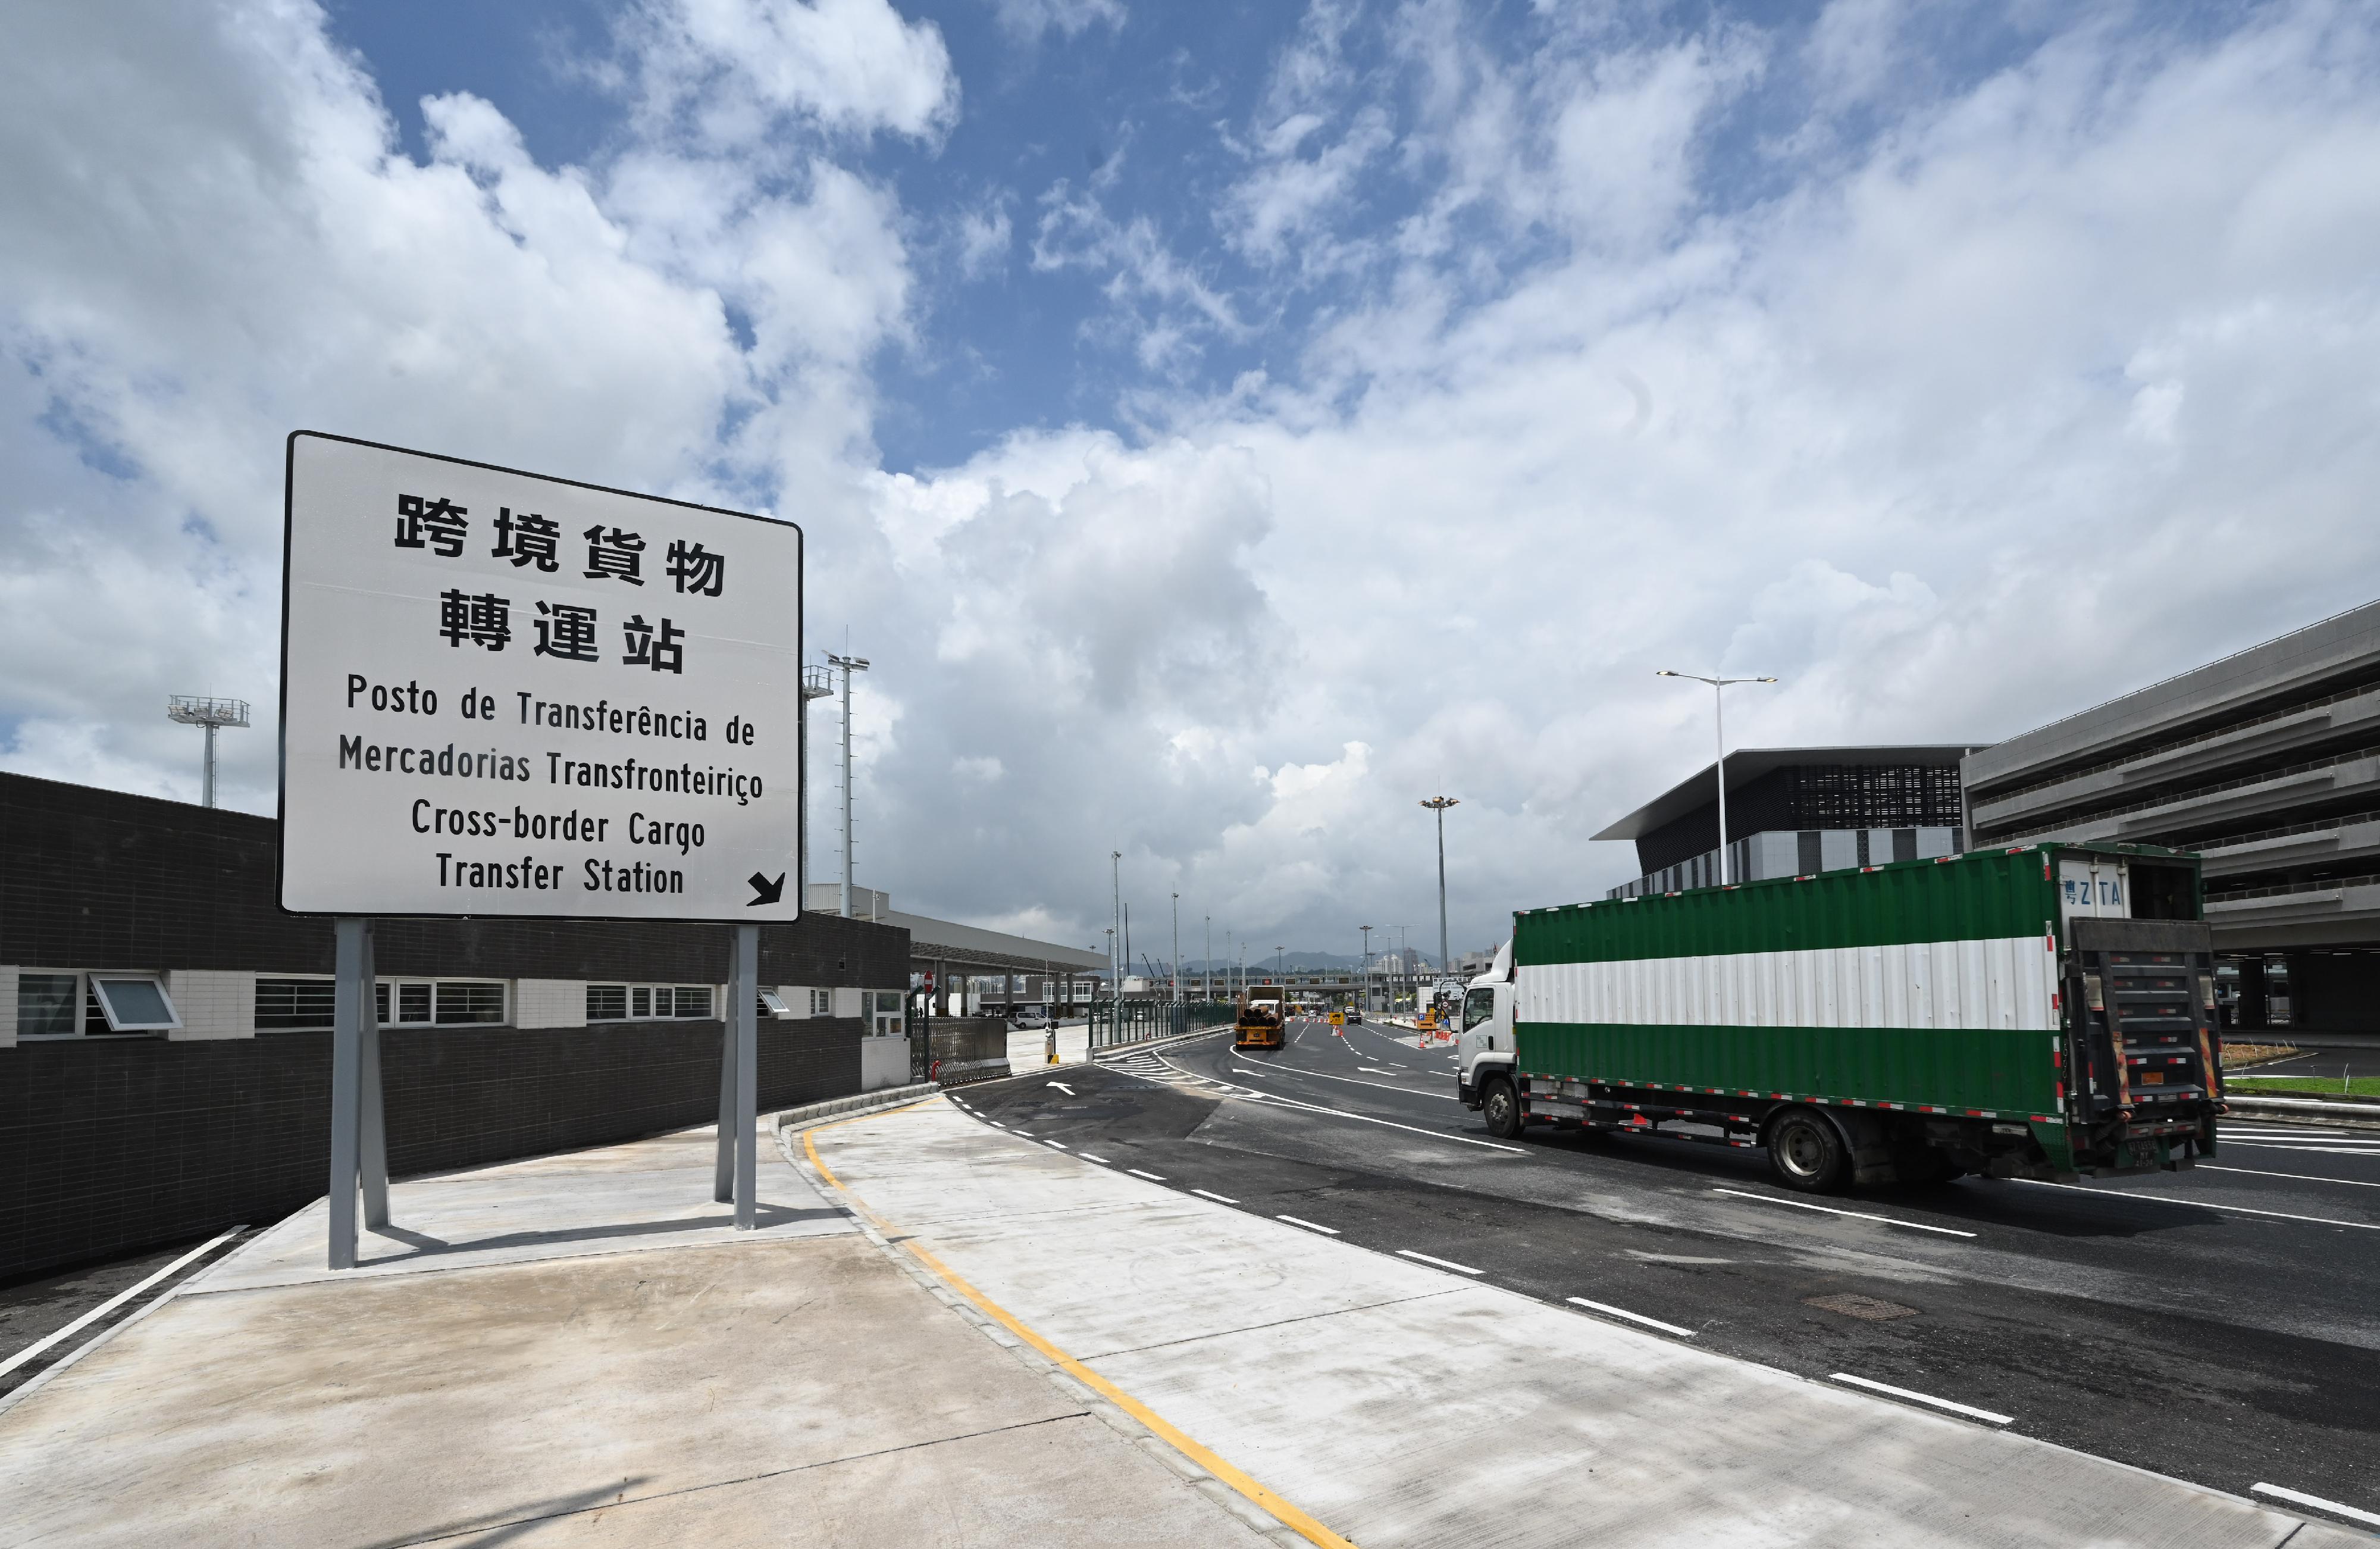 Following the discussions and agreement made between the governments of Hong Kong and Macao, the arrangement for Hong Kong-Macao cross-boundary goods vehicles using the Hong Kong-Zhuhai-Macao Bridge (HZMB) will be implemented. Photo shows the HZMB Macao Port logistics transfer facility. 